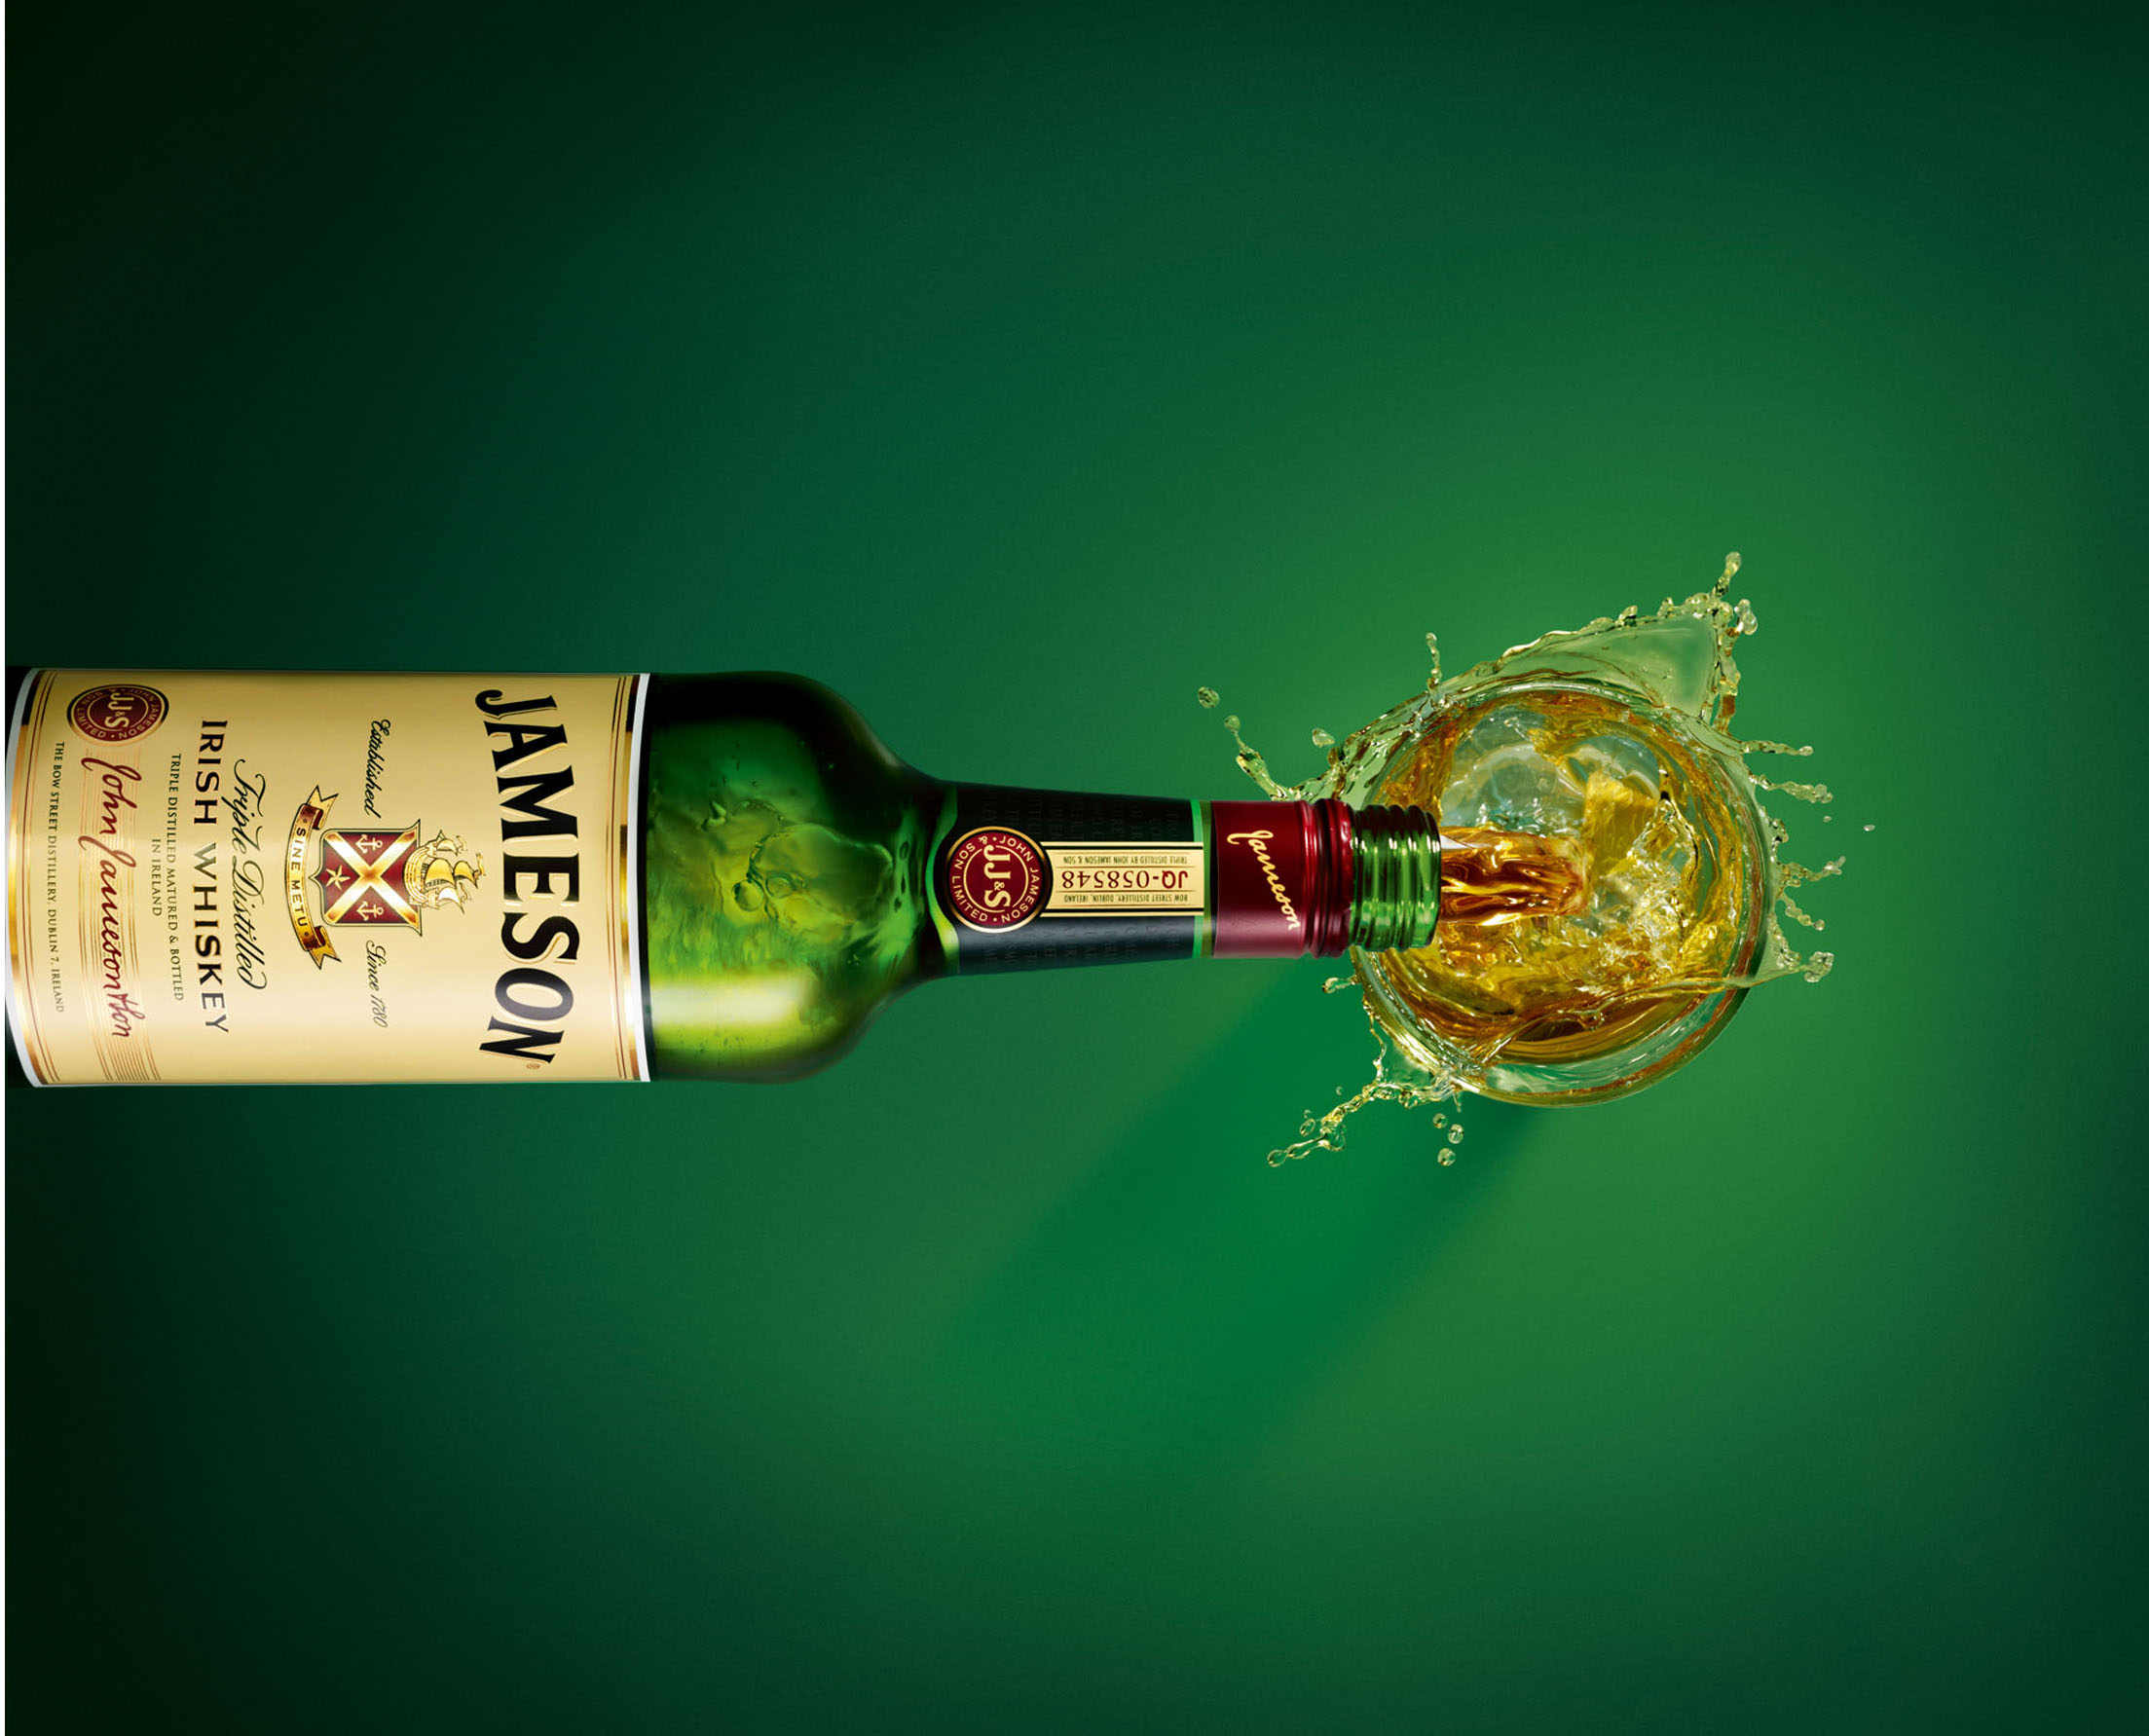 With sales of 5.9 million cases in 2016, Jameson volumes grew 12.4% over 2015 according to IWSR which puts the brand in 48th place in the Top 100, up one place from last year’s listing.